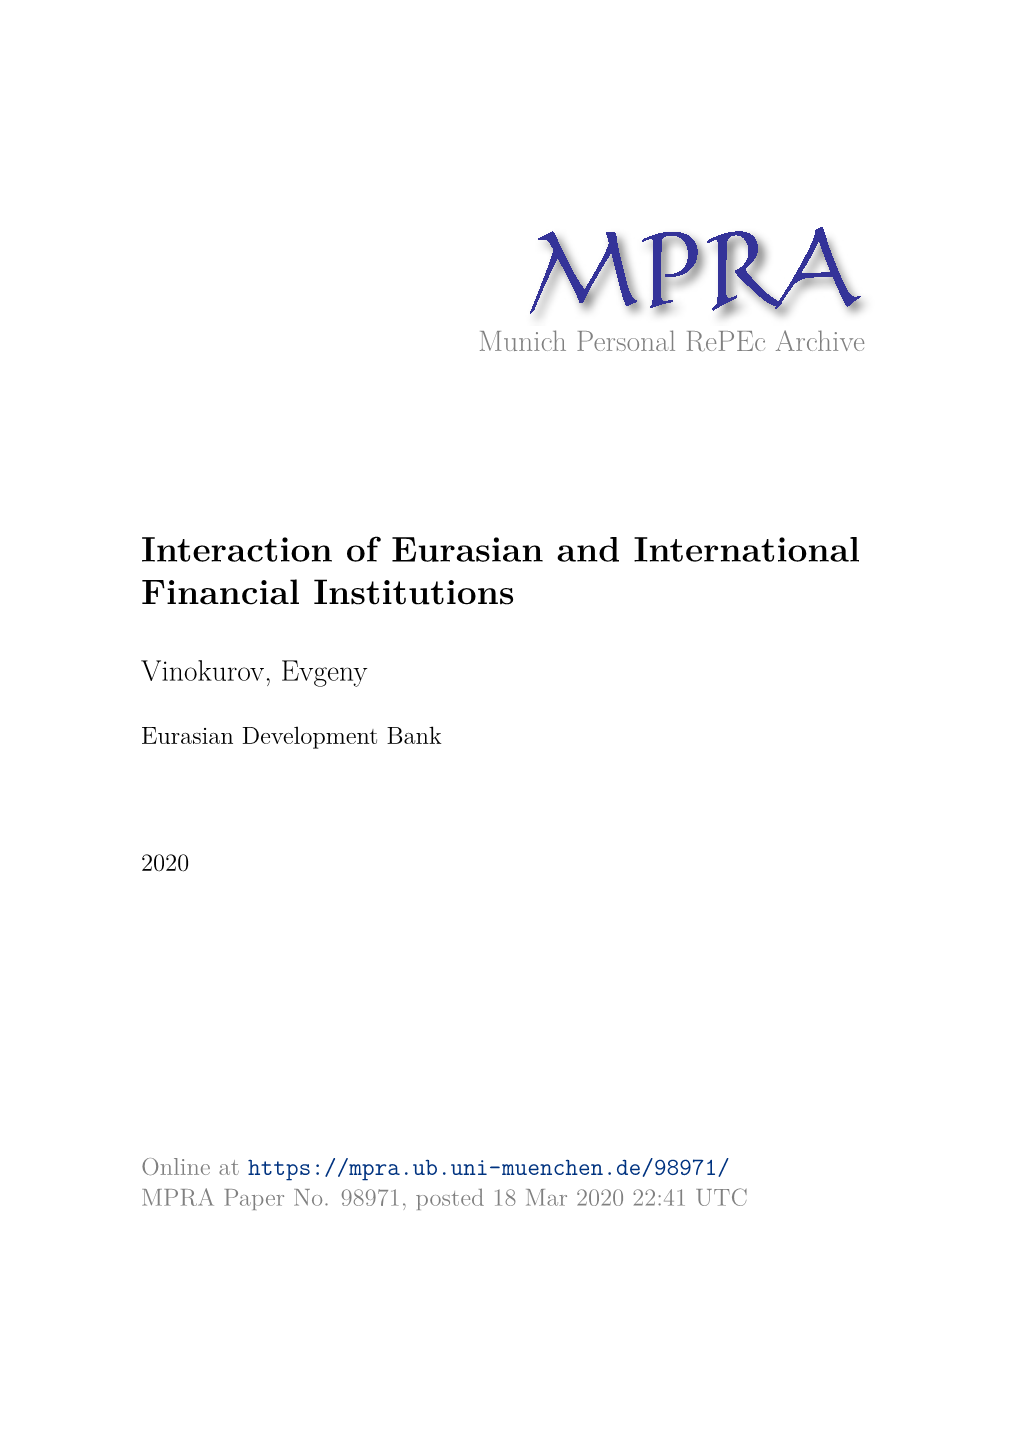 Interaction of Eurasian and International Financial Institutions